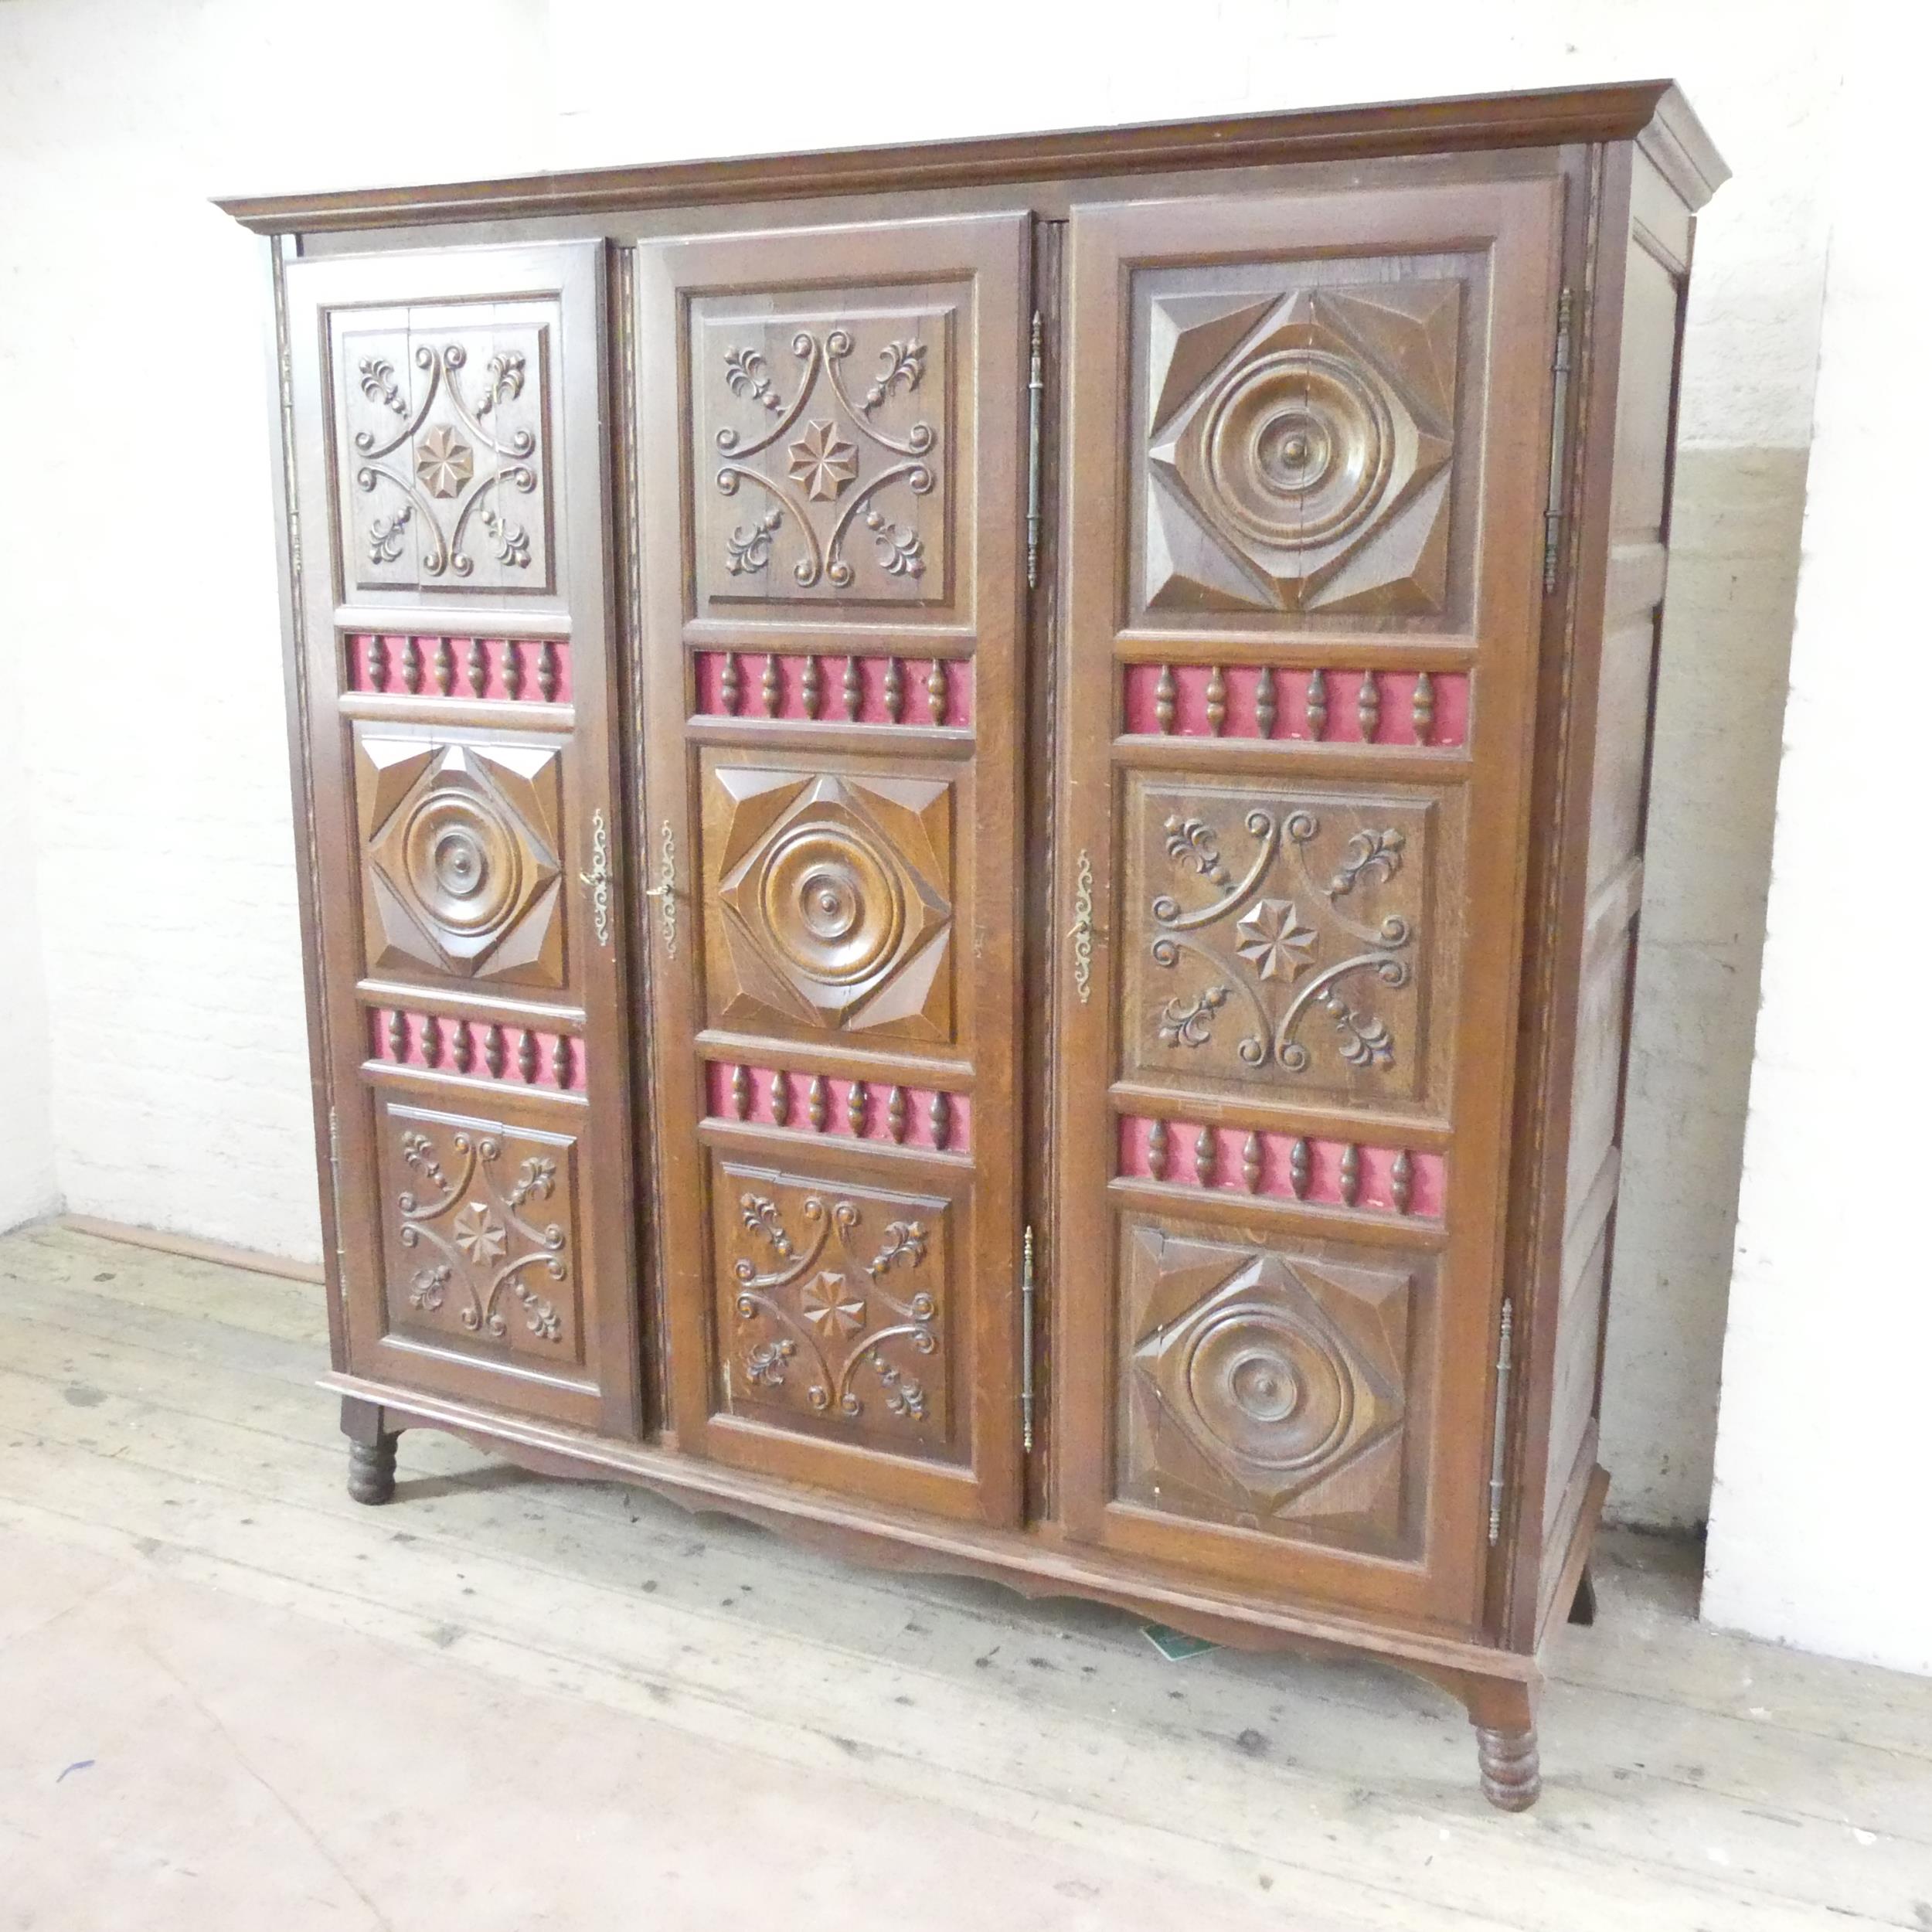 A French oak three-door armoire, with shelf fitted interior. 186x188x56cm. Interior has been